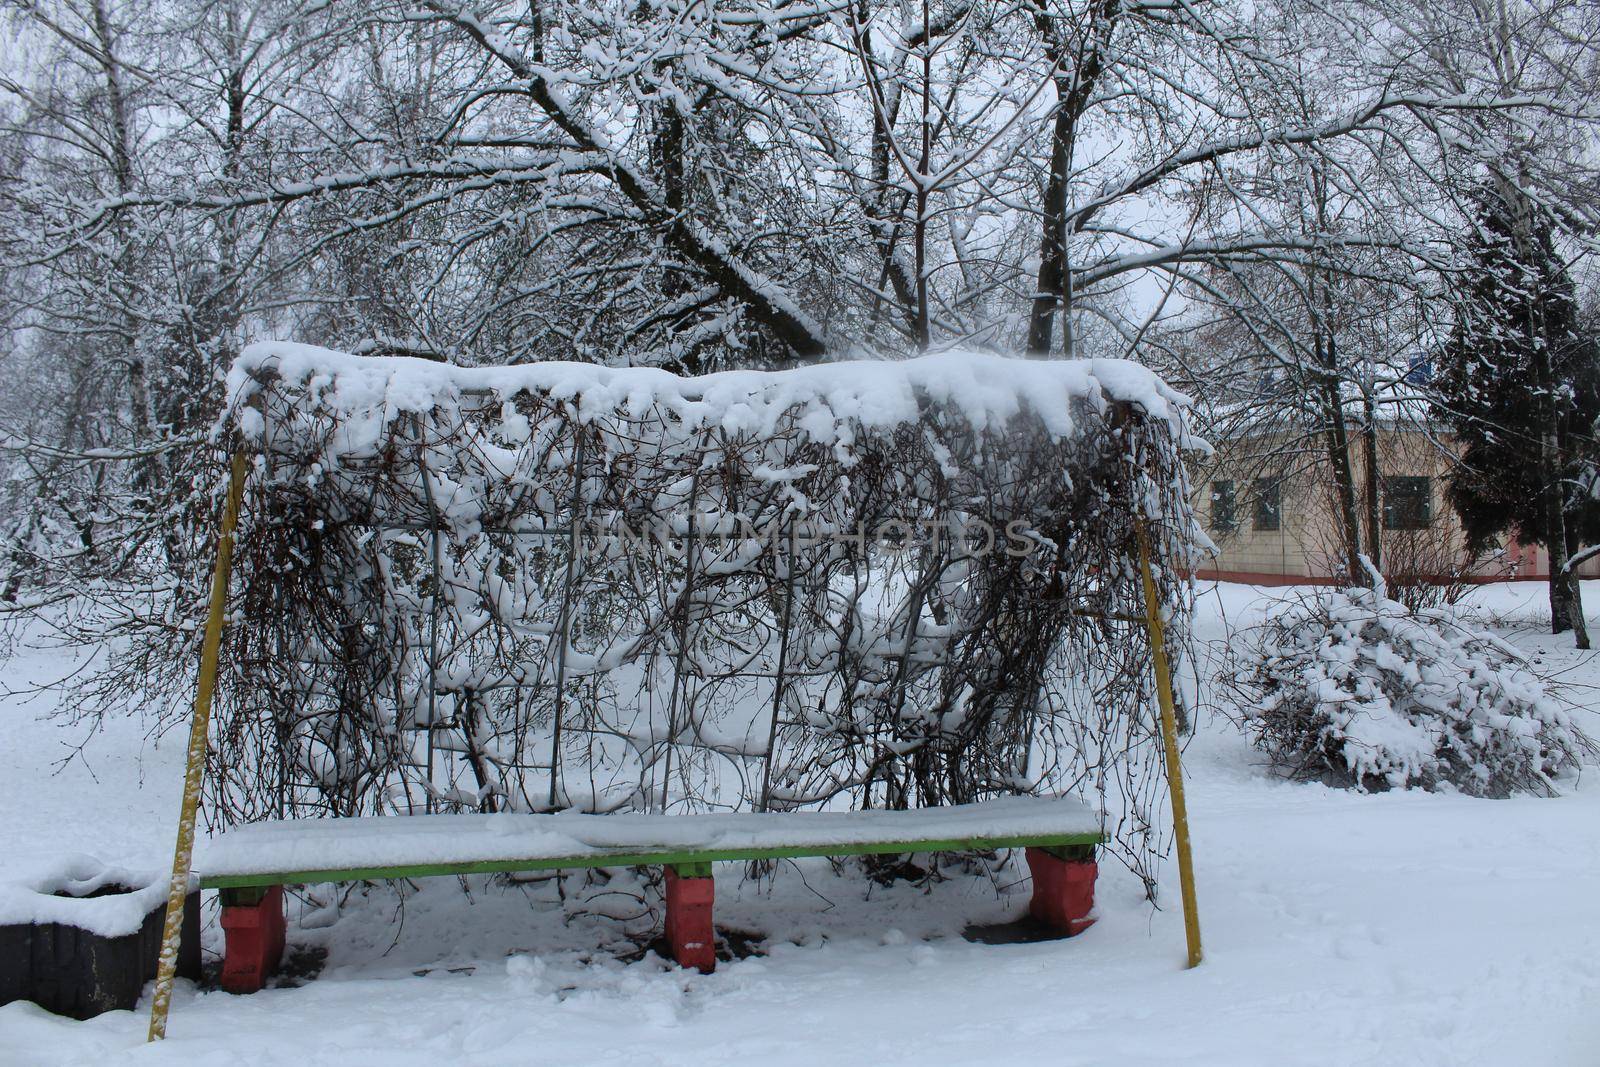 city park in winter. Paths bench trees ate Christmas trees in the winter in the snow. winter walks.